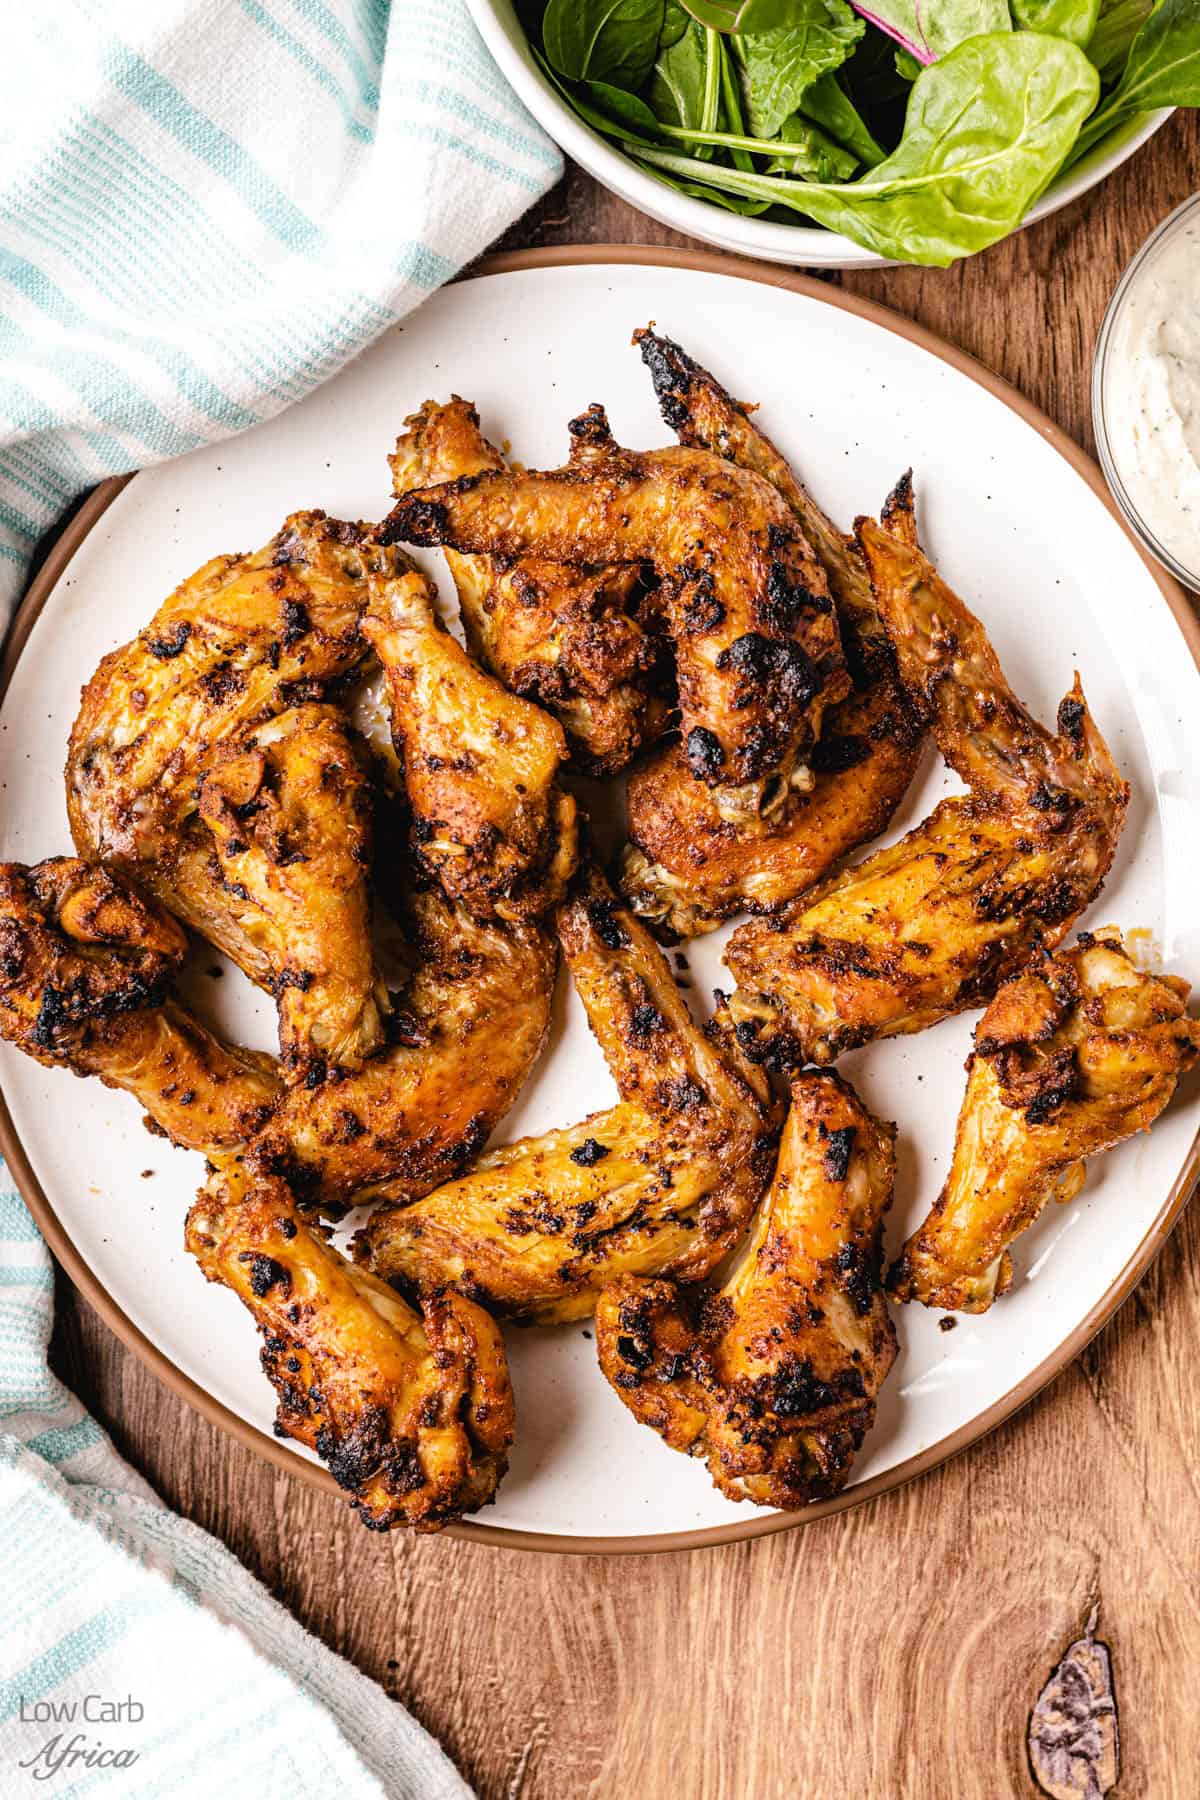 Ready-to-eat oven-baked chicken wings